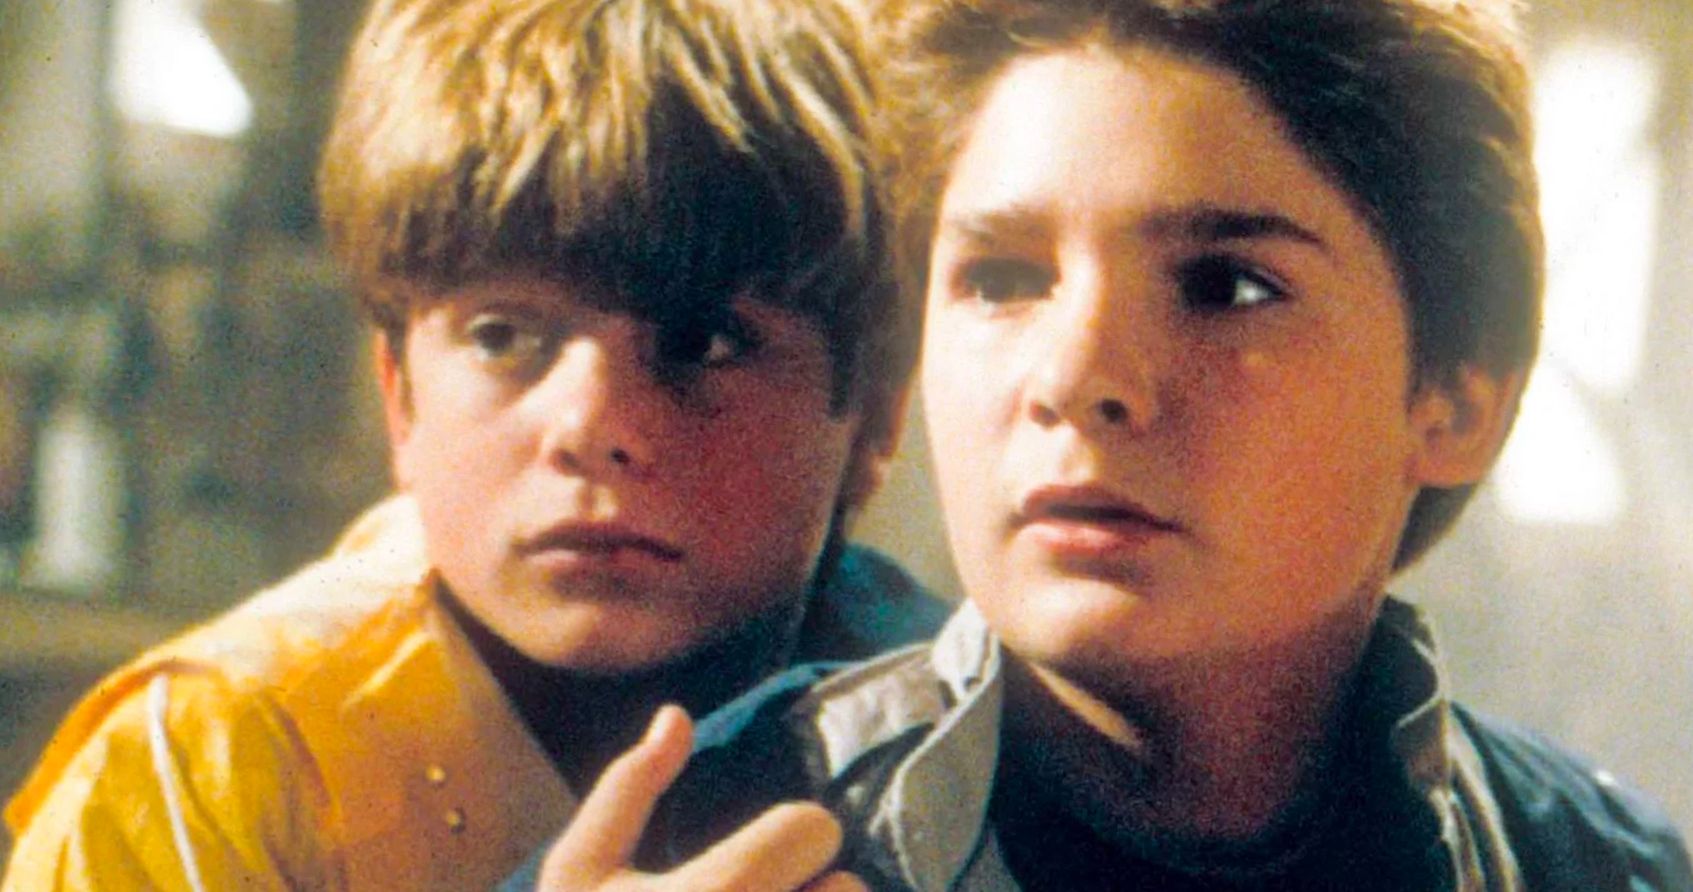 The Goonies 2 Might Still Happen with the Right Director Says Corey Feldman